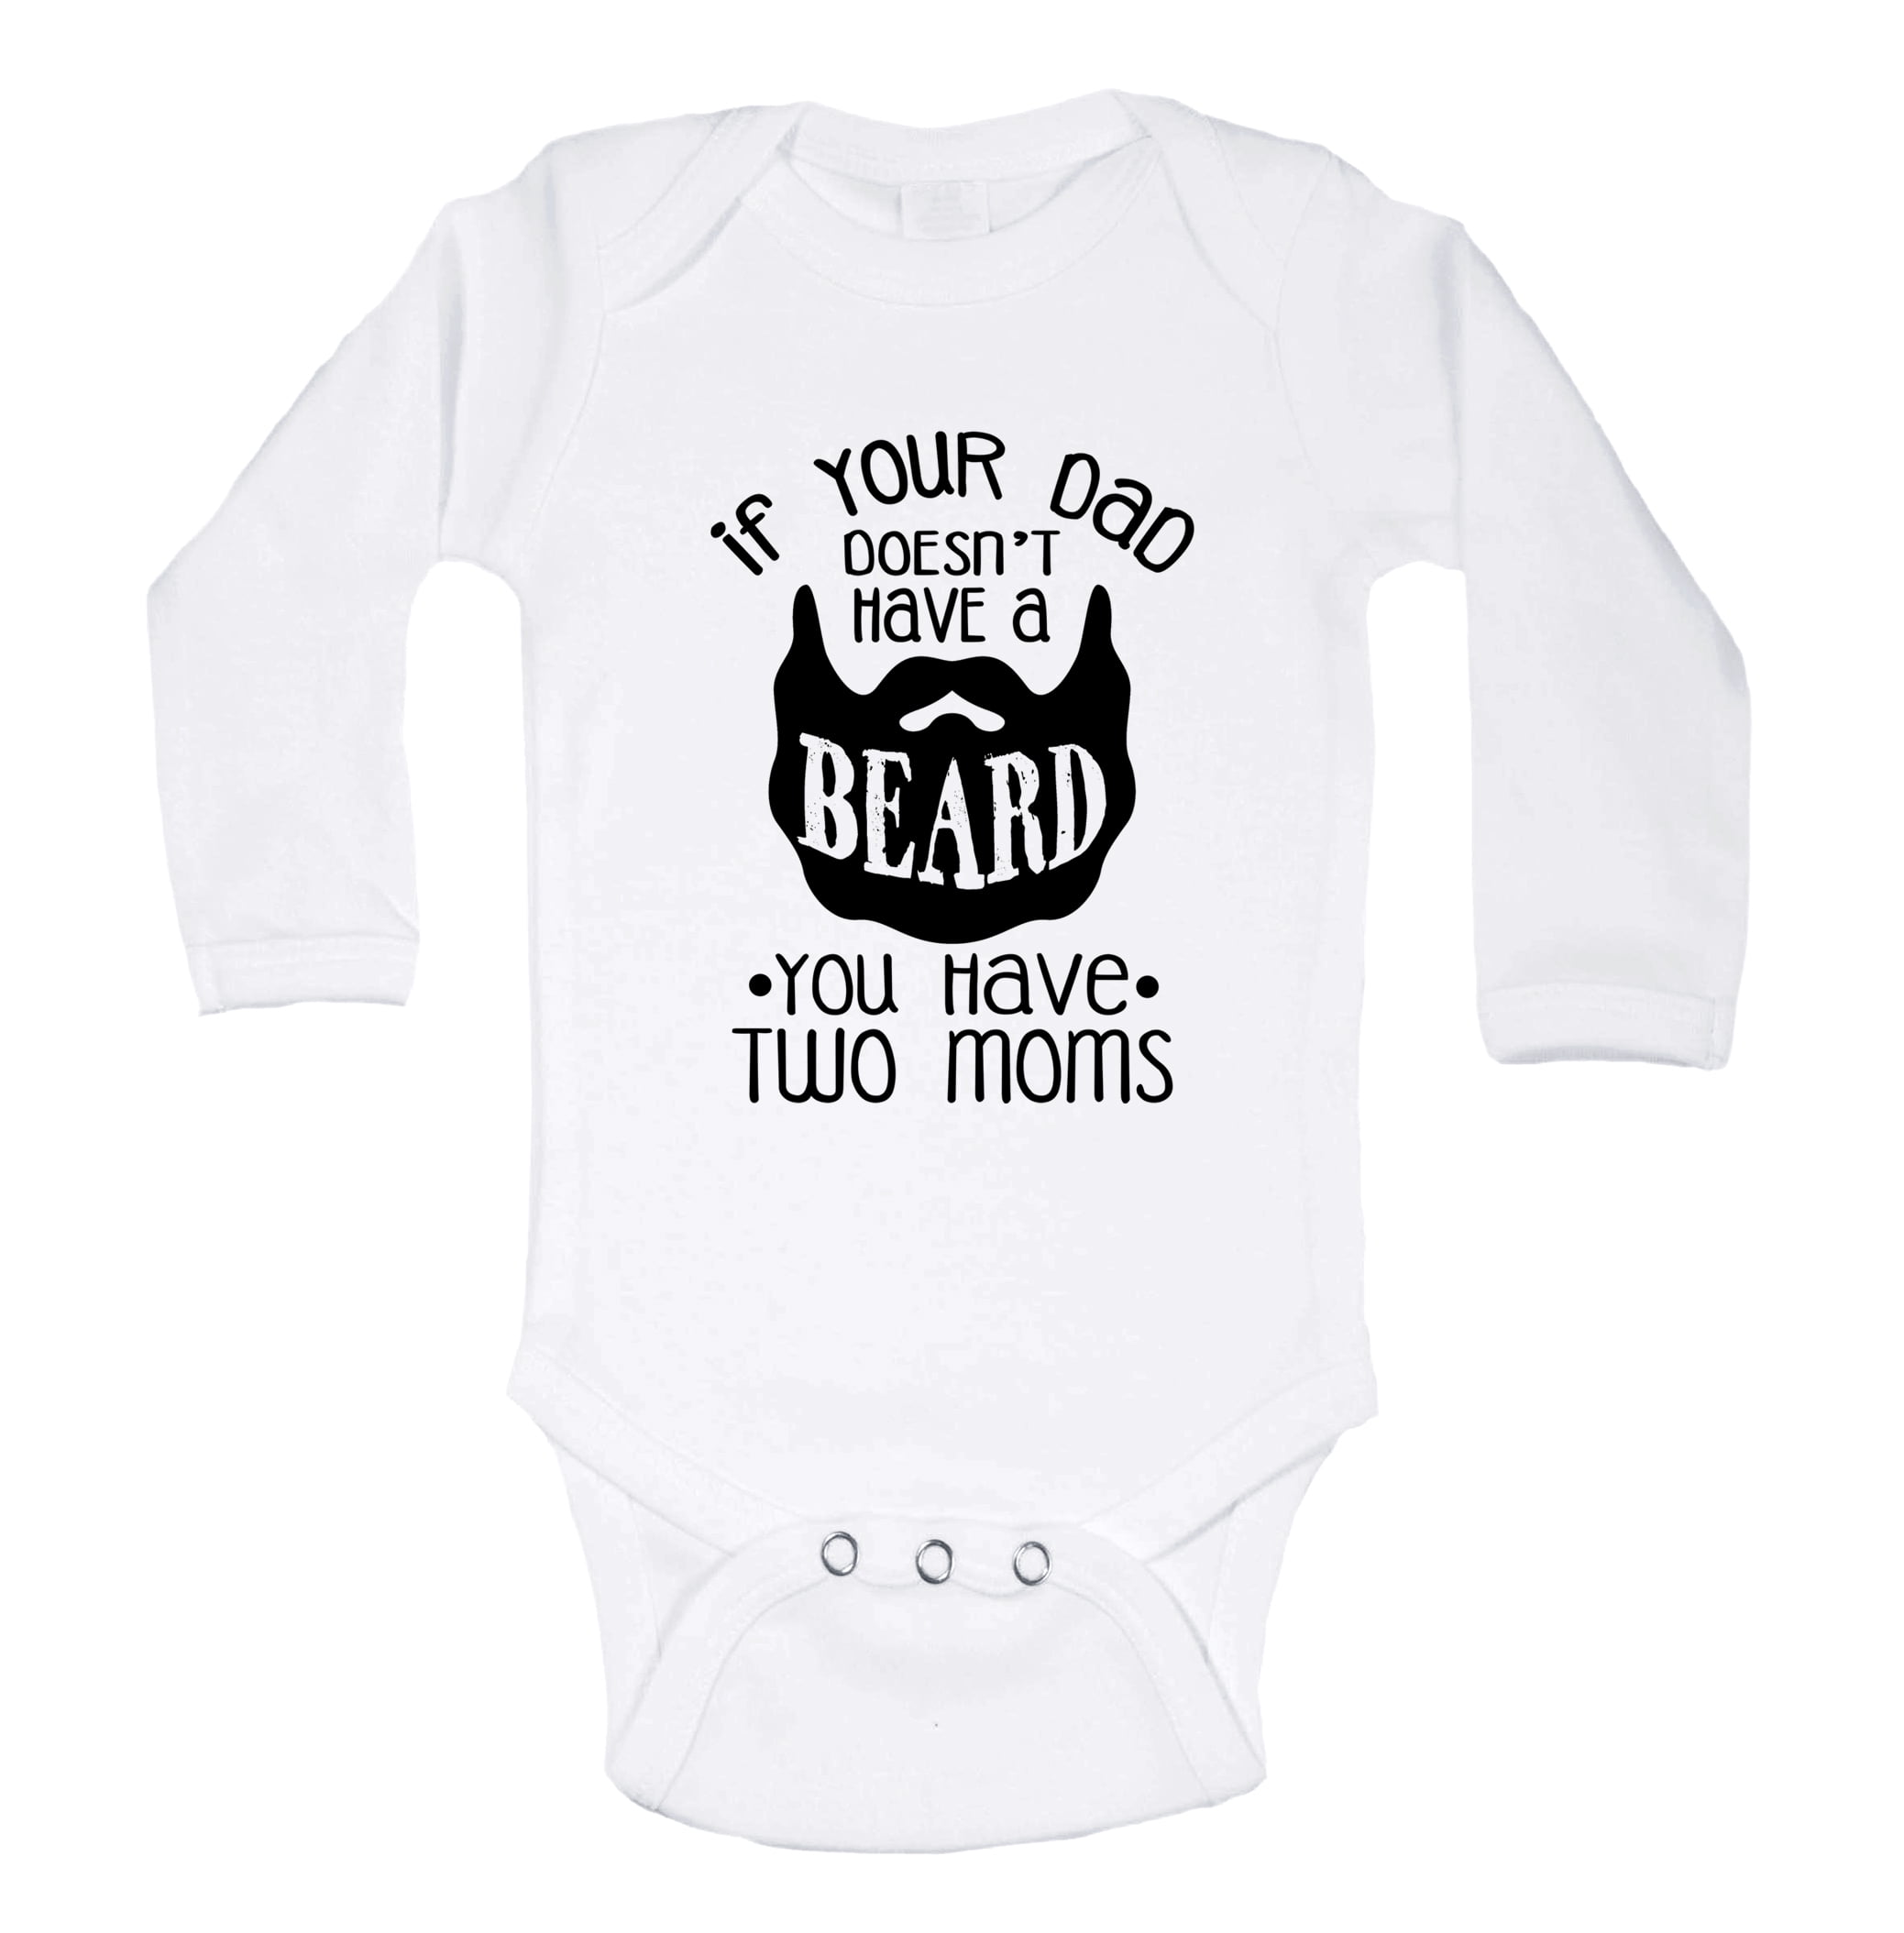 White Funny Bald Daddy Kids Onesie “I have more hair than my daddy” Funny Threadz Kids 3-6 Months 